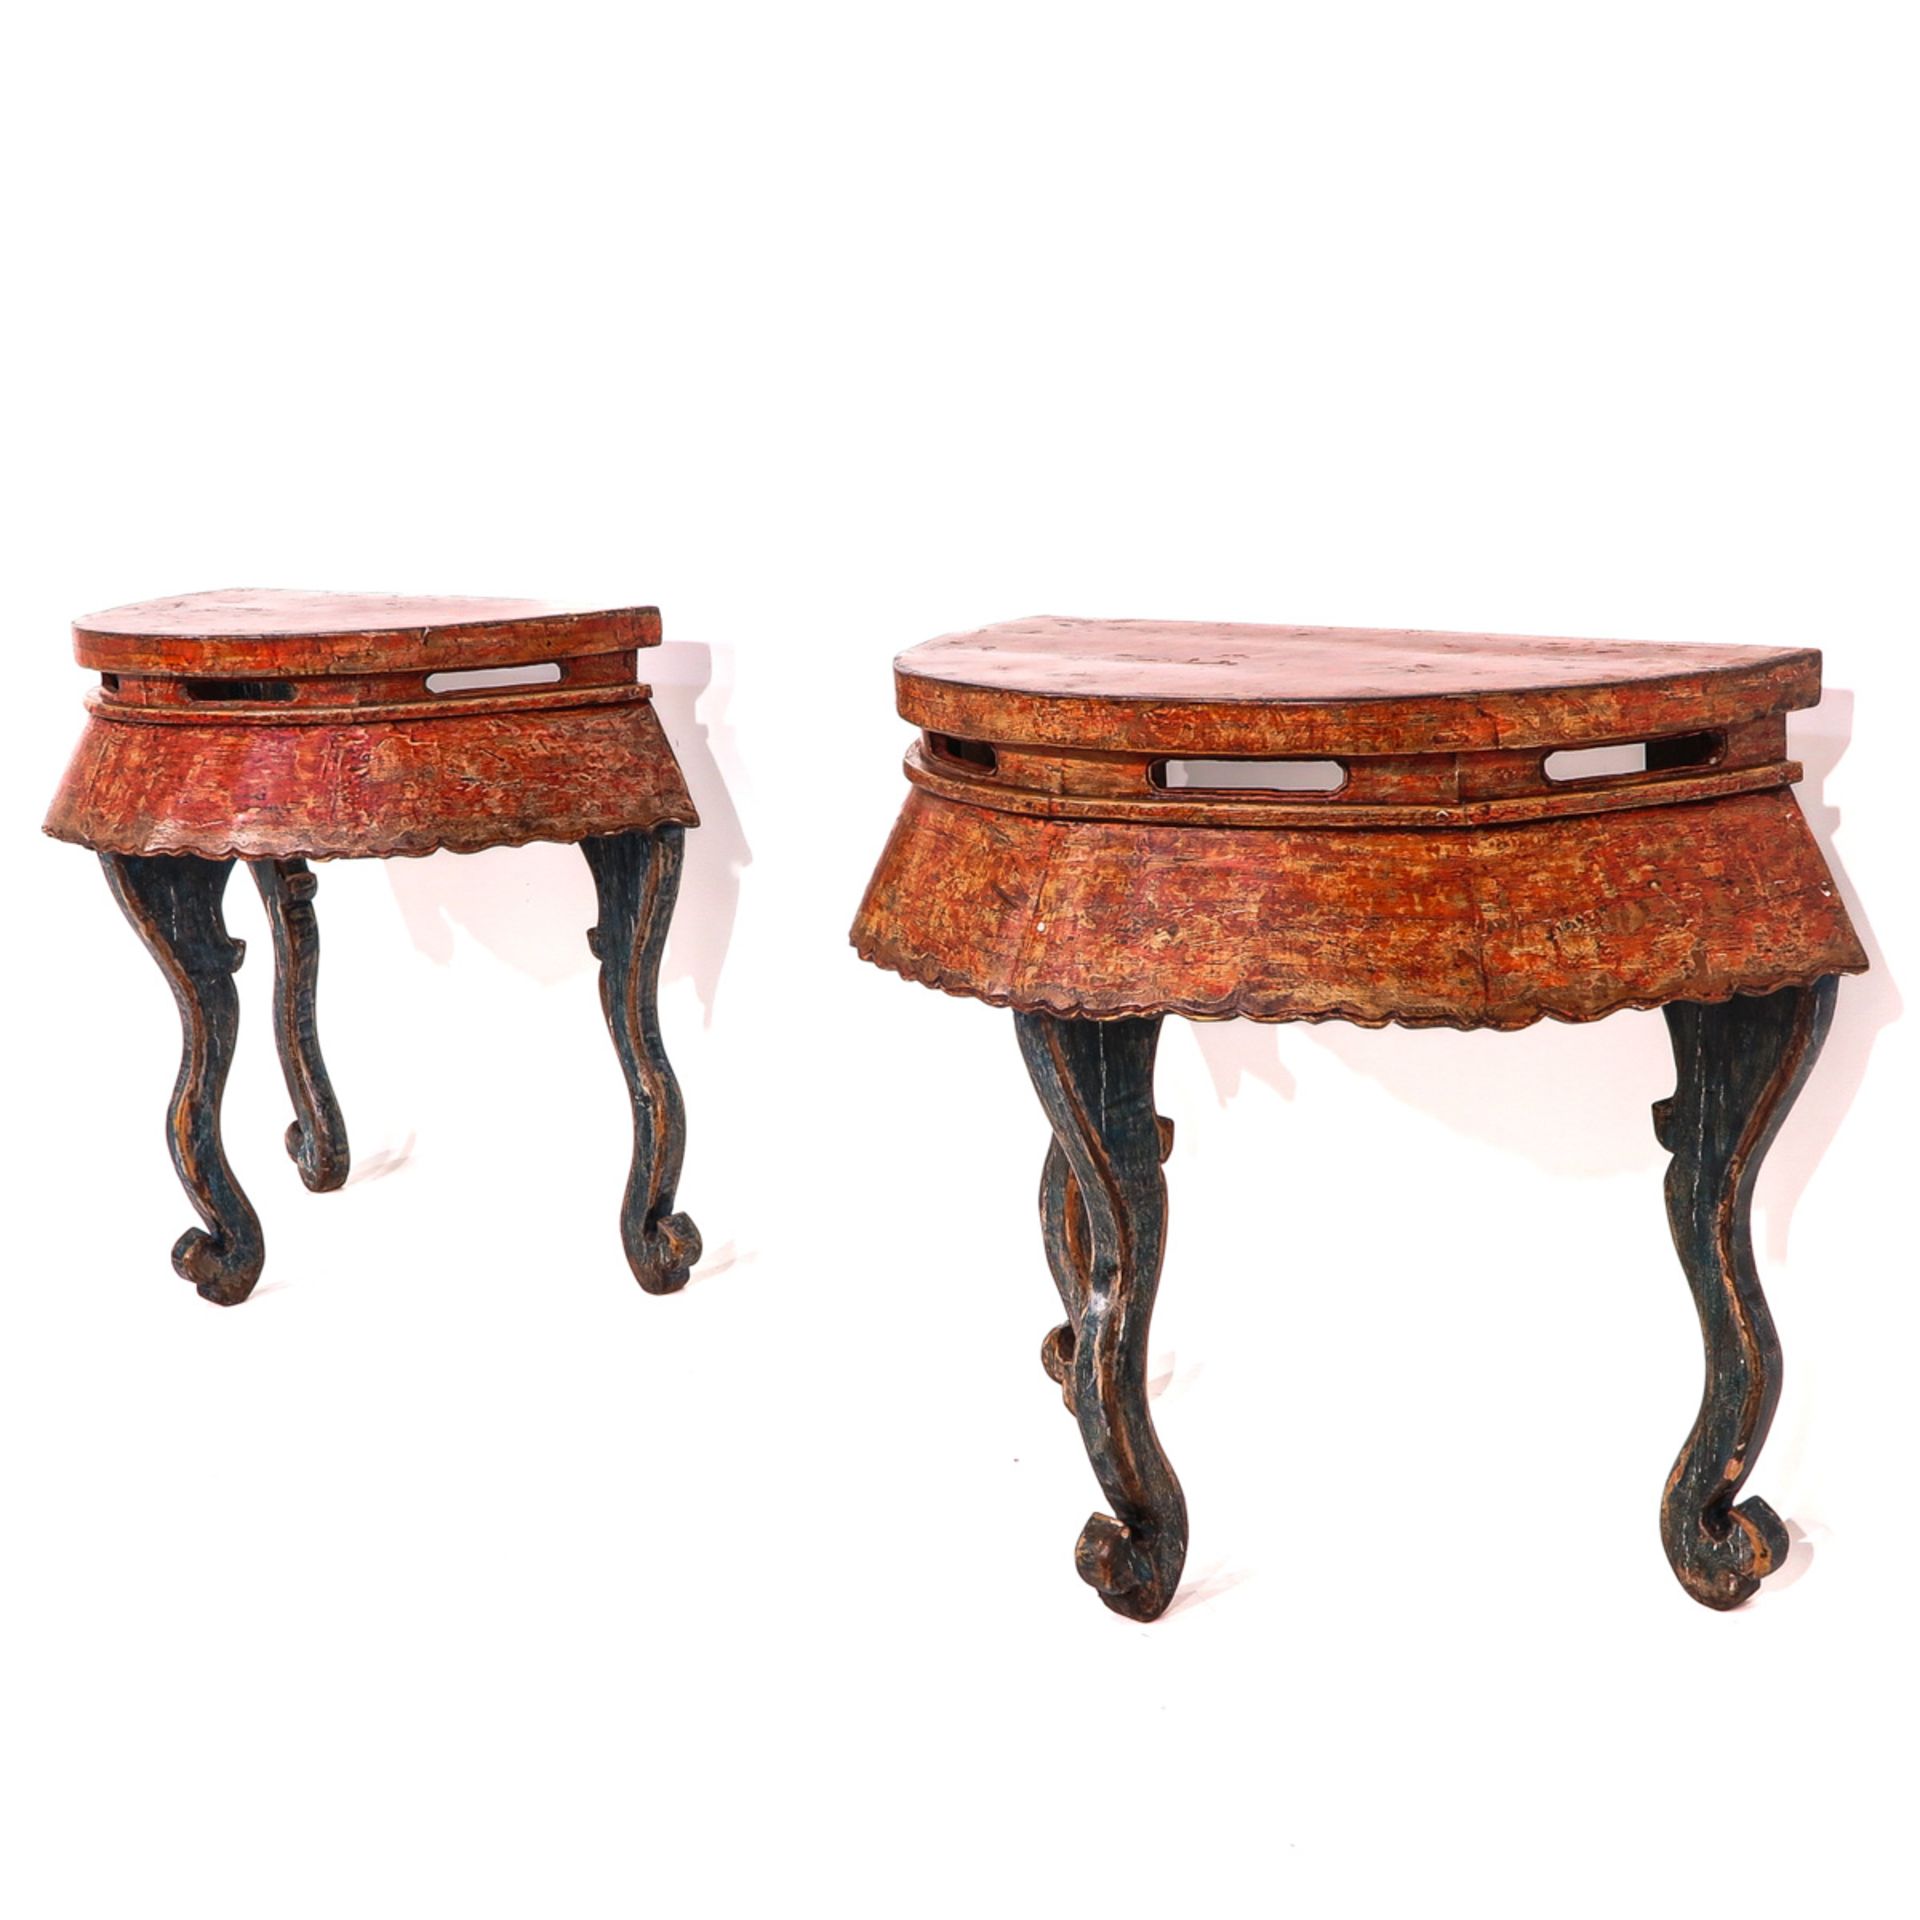 A Lot of 2 Demi Lune Console Tables - Image 3 of 8